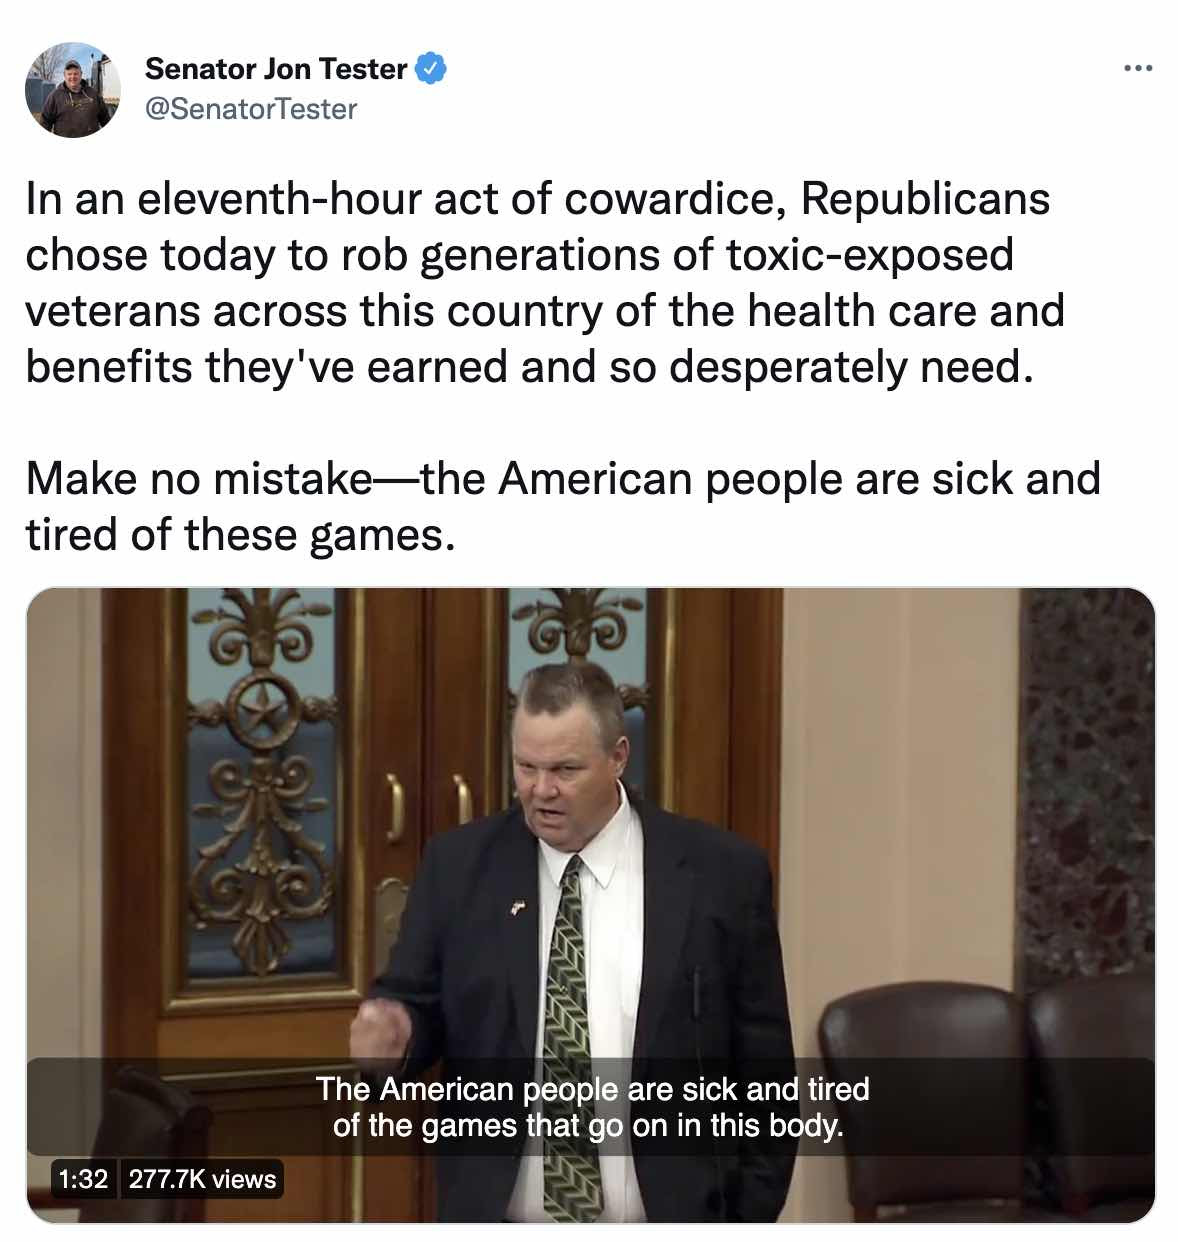 "In an eleventh-hour act of cowardice, Republicans chose today to rob generations of toxic-exposed veterans across this country of the health care and benefits they've earned and so desperately need. Make no mistake—the American people are sick and tired of these games." - Jon Tester / Twitter